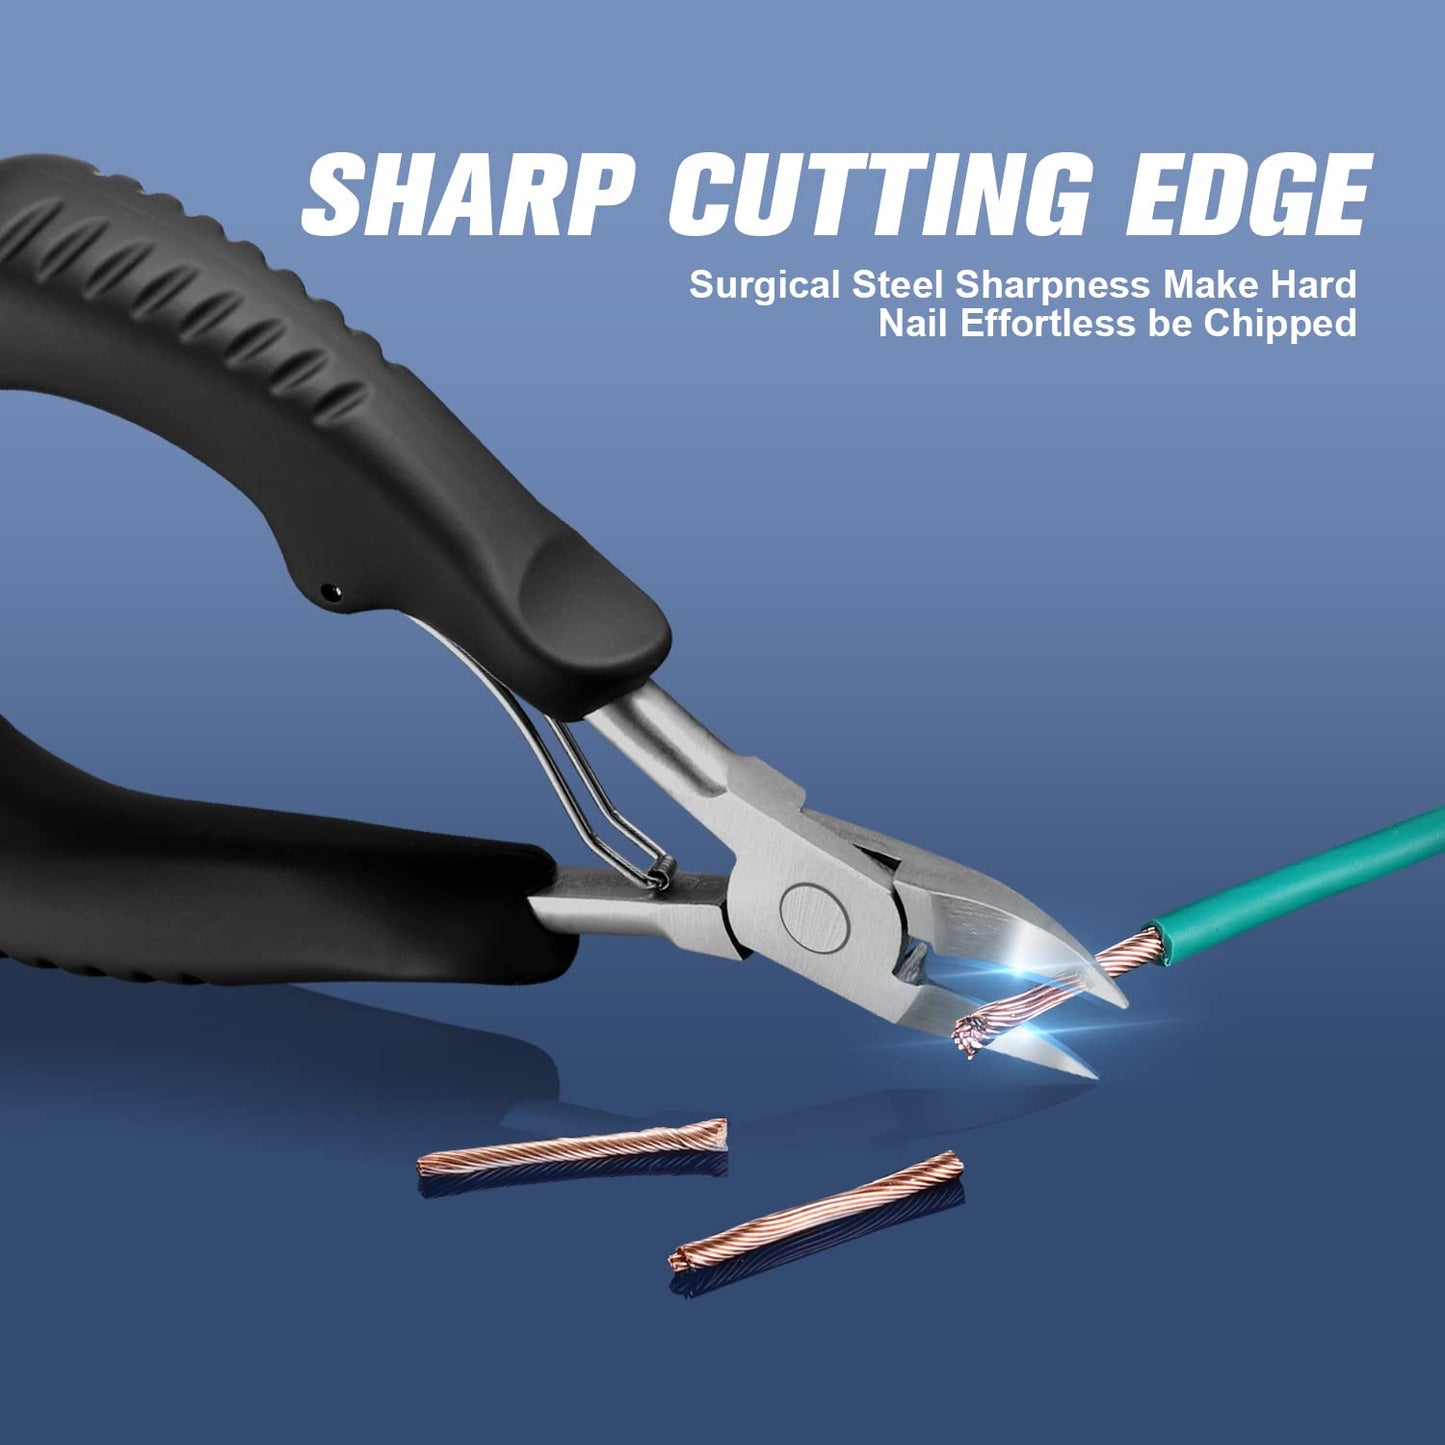 A pair of nail clippers are cutting through some cables. The text says, 'Sharp cutting edge.'